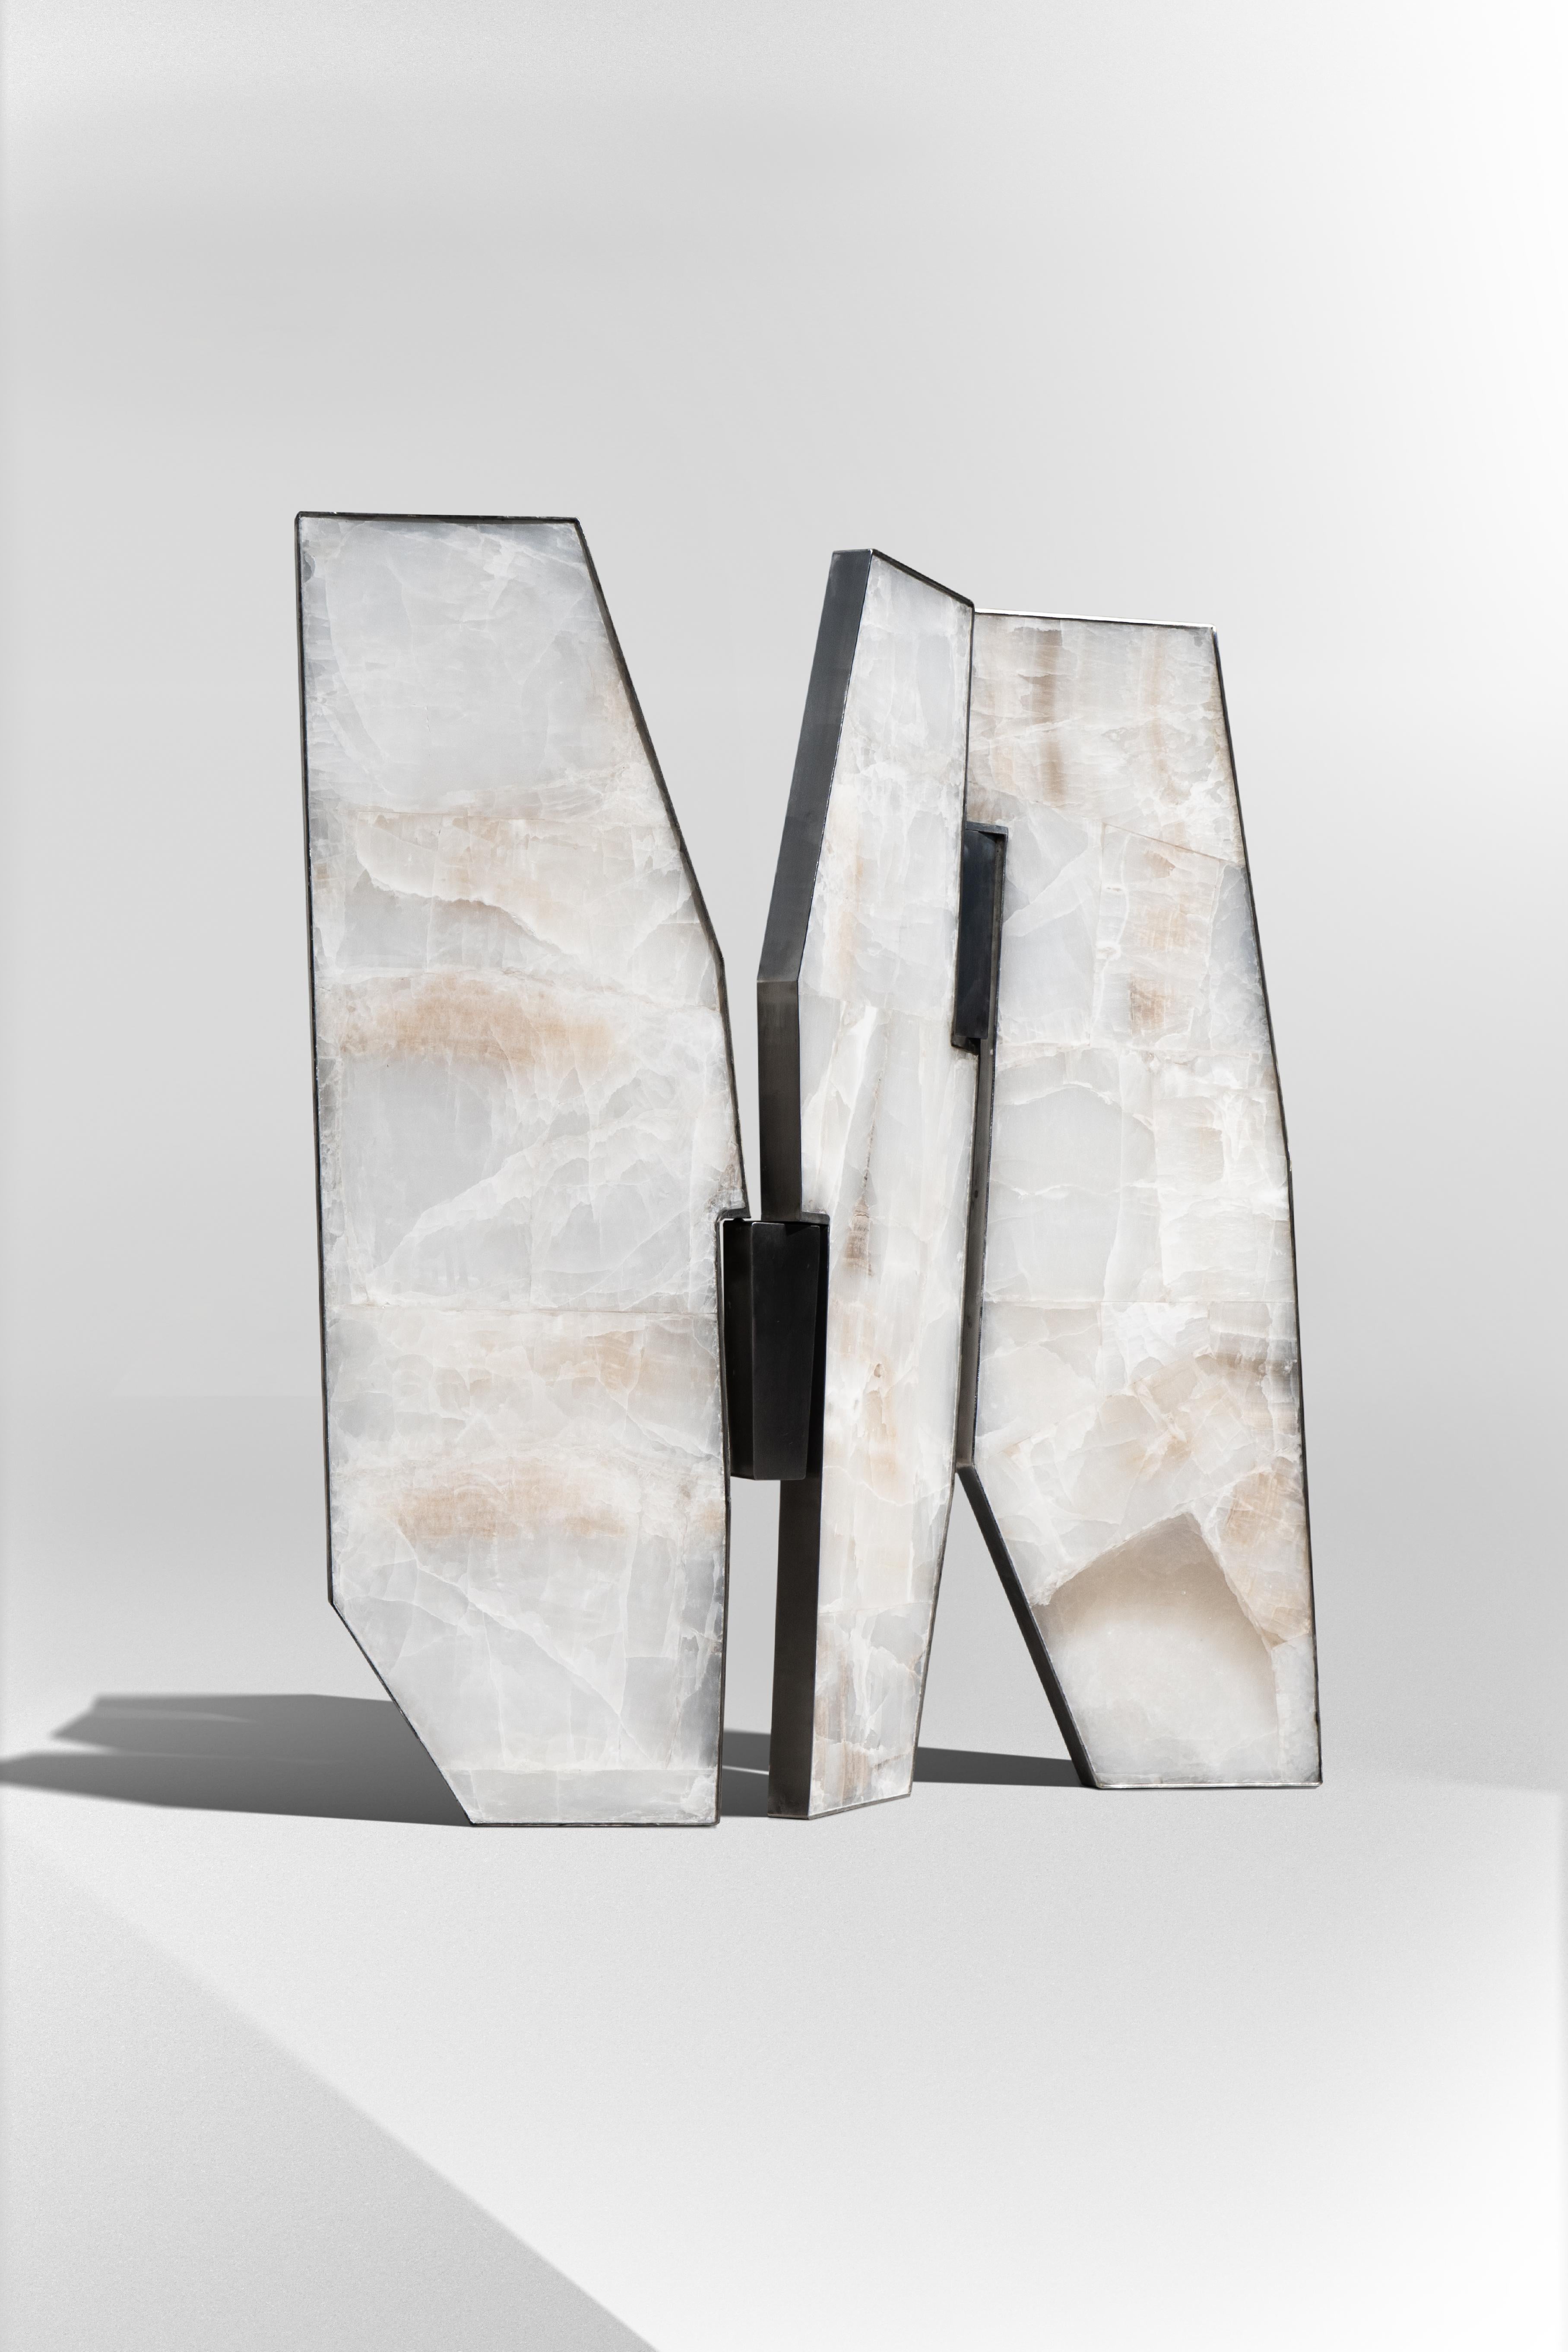 The Onyx Screen by Giampiero Tagliaferri
Limited Edition Of 8 Pieces
Dimensions: D 5 x W 175 x H 180 cm.
Materials: White onyx and steel.

Giampiero Tagliaferri is opening the doors of his new Studio to Galerie Philia for their first Los Angeles